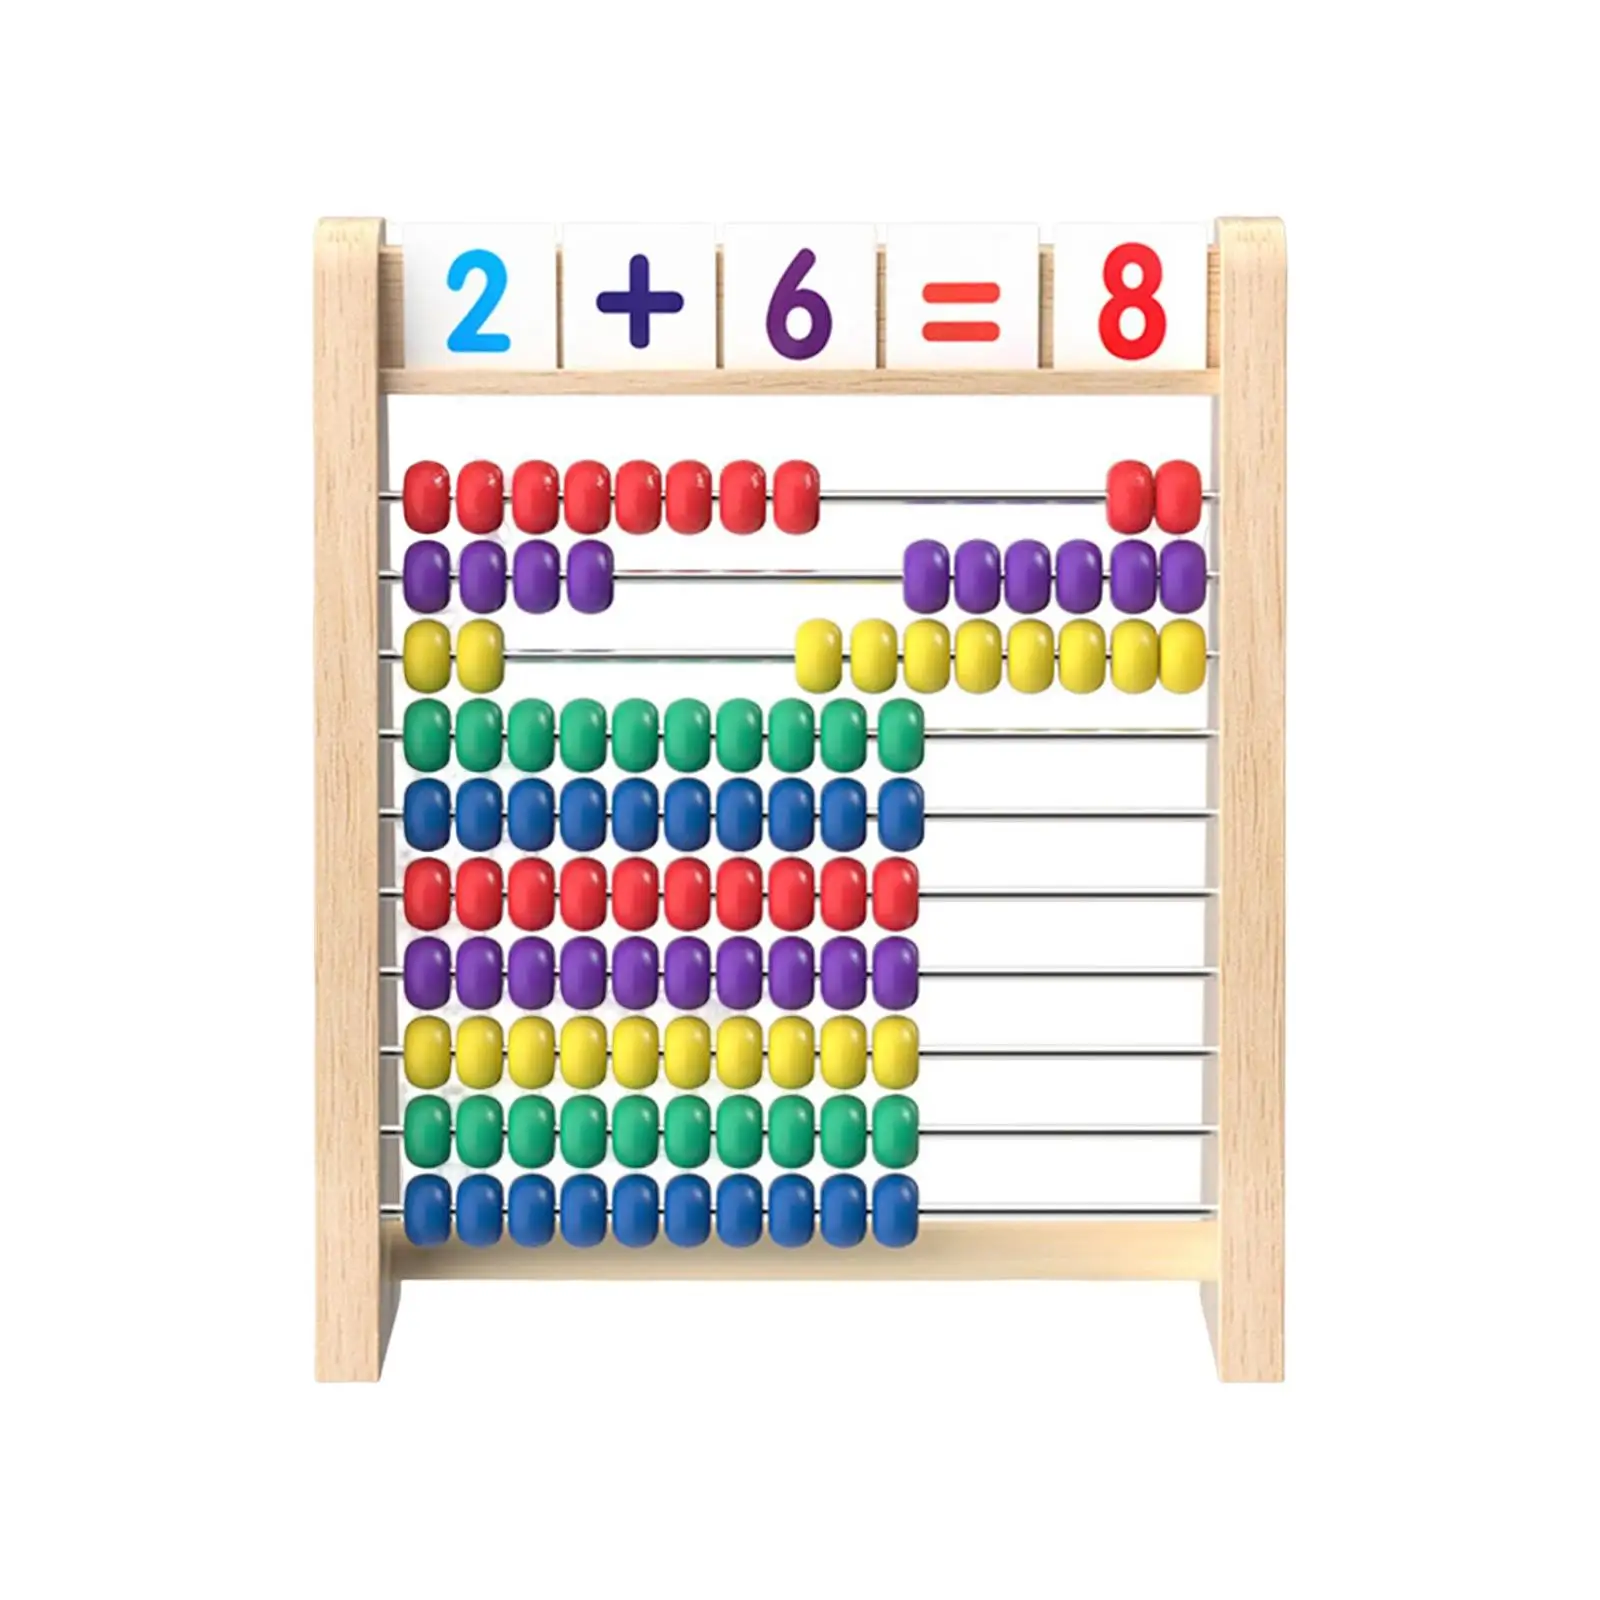 10 Row Preschool Learning Toy Counting Arithmetic Learning Math Learning Toys for Activity Toys